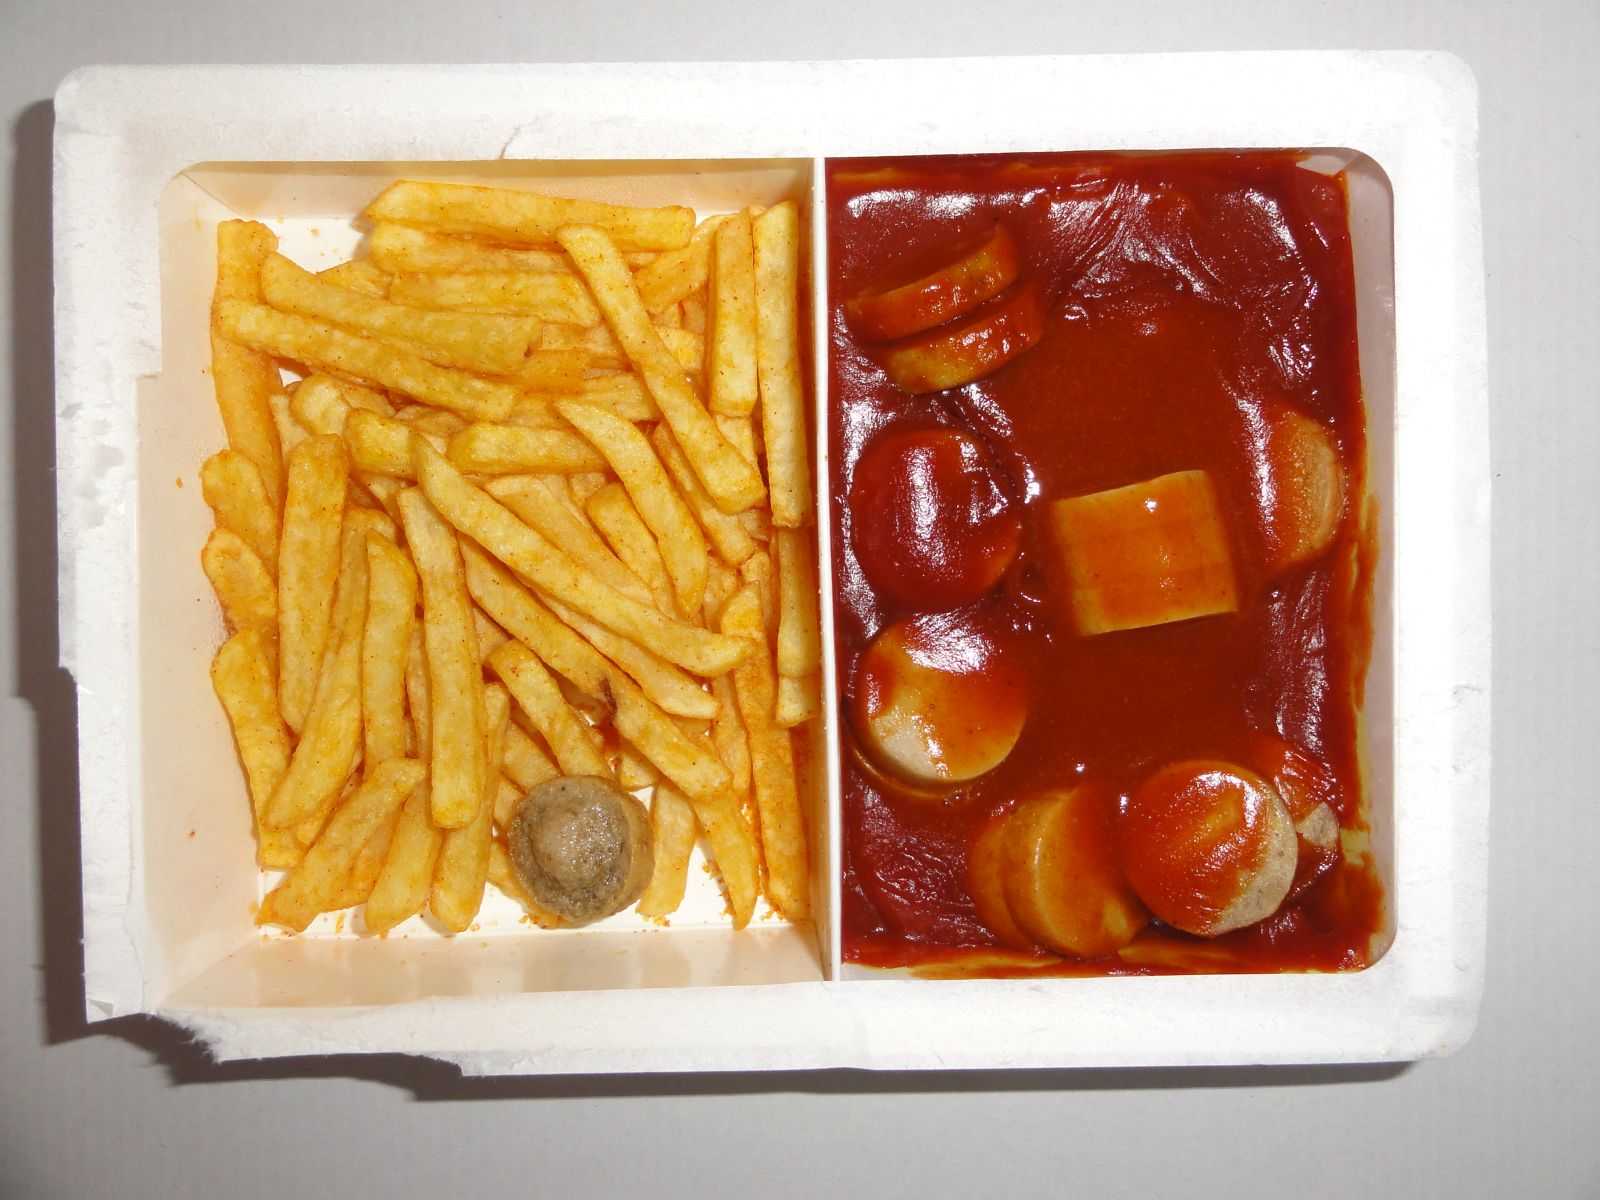 Ready_to_eat_microwave_food_(TV_dinner)_Currywurst_with_French_fries.jpg